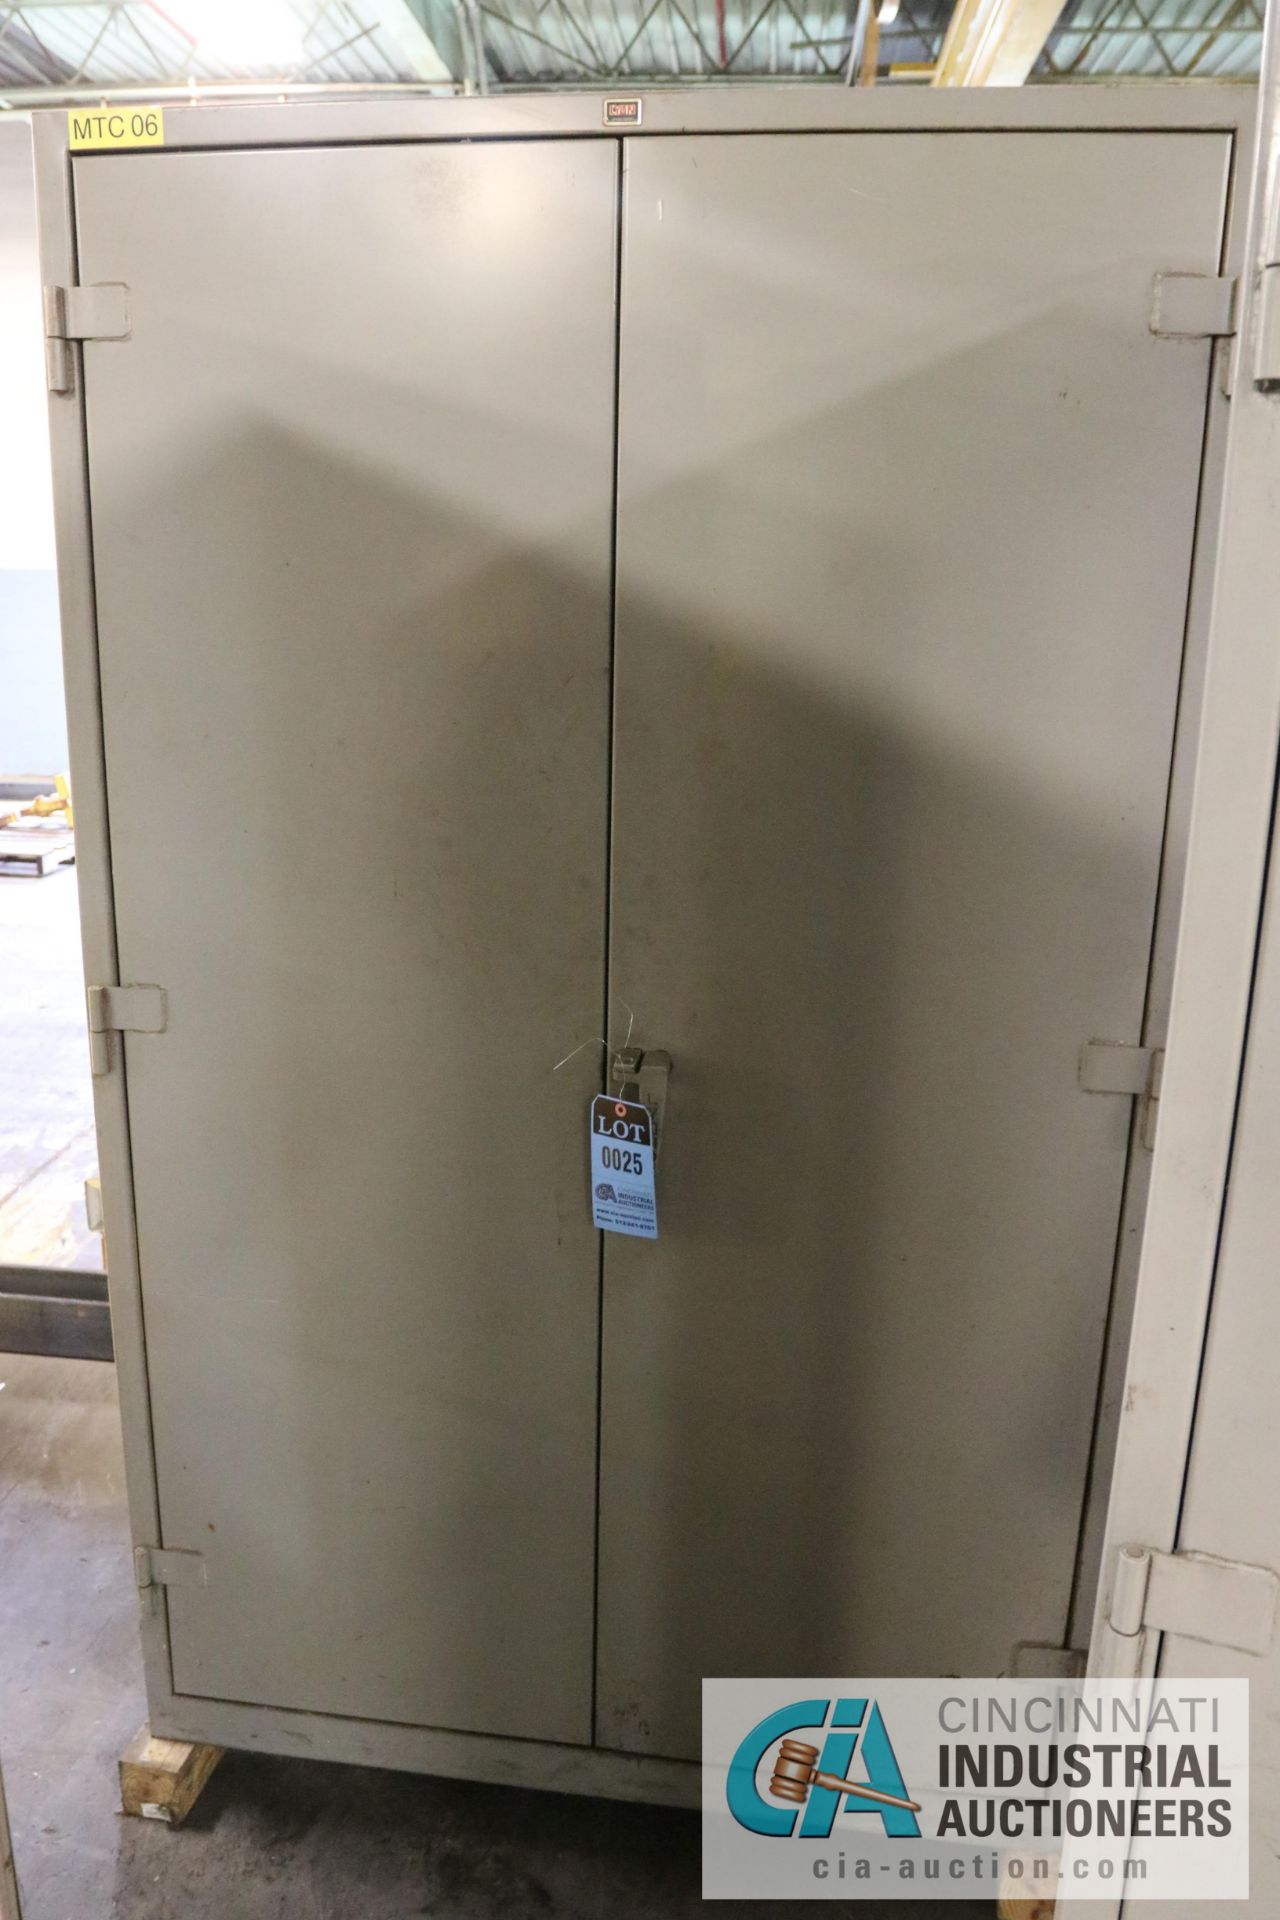 48" X 24" X 78" LYON CABINET W/ SHELVES - $10.00 Rigging Fee Due to Onsite Rigger - Located in